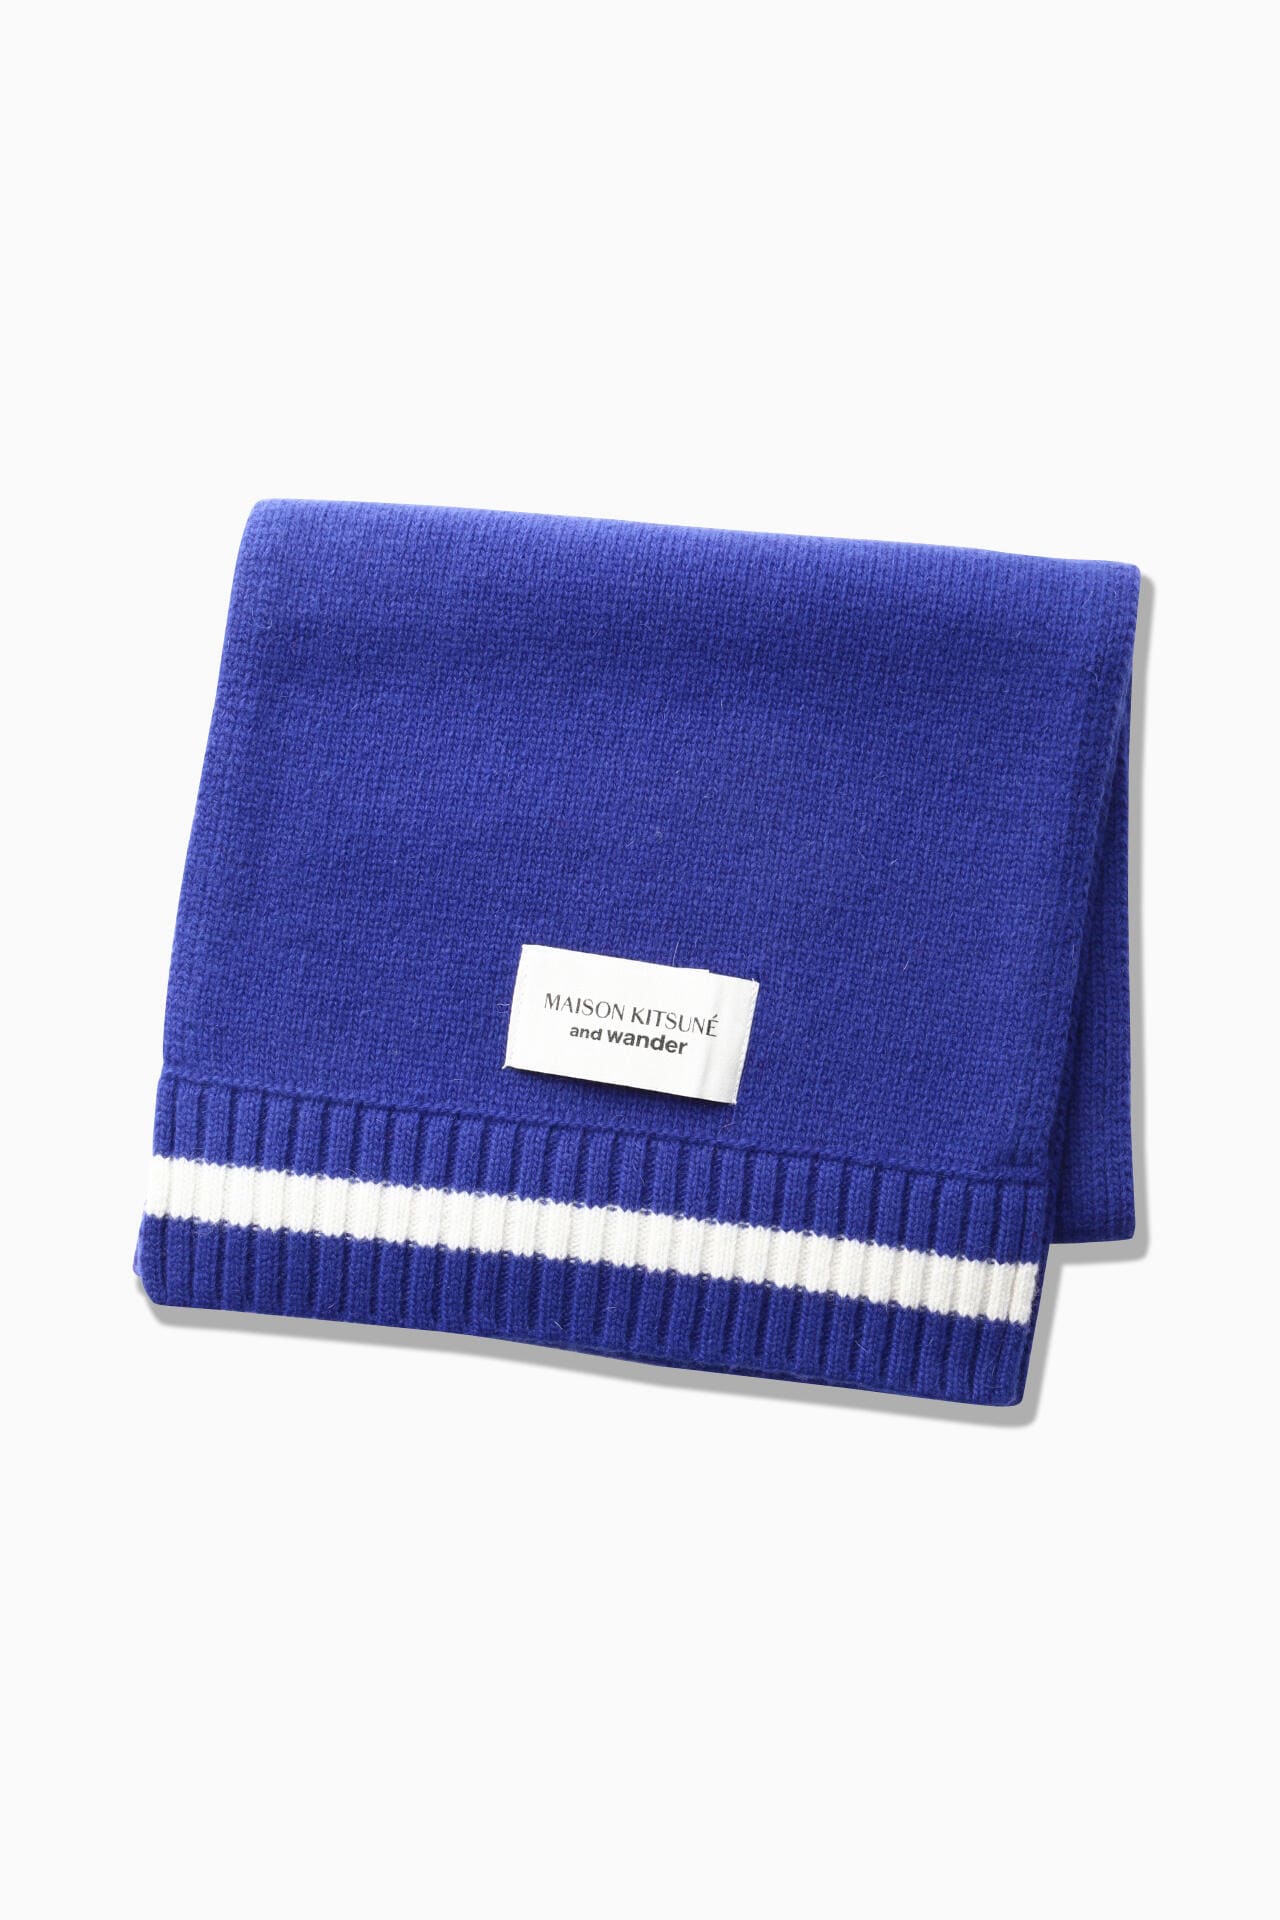 MAISON KITSUNÉ × and wander knit stole | goods | and wander ONLINE ...